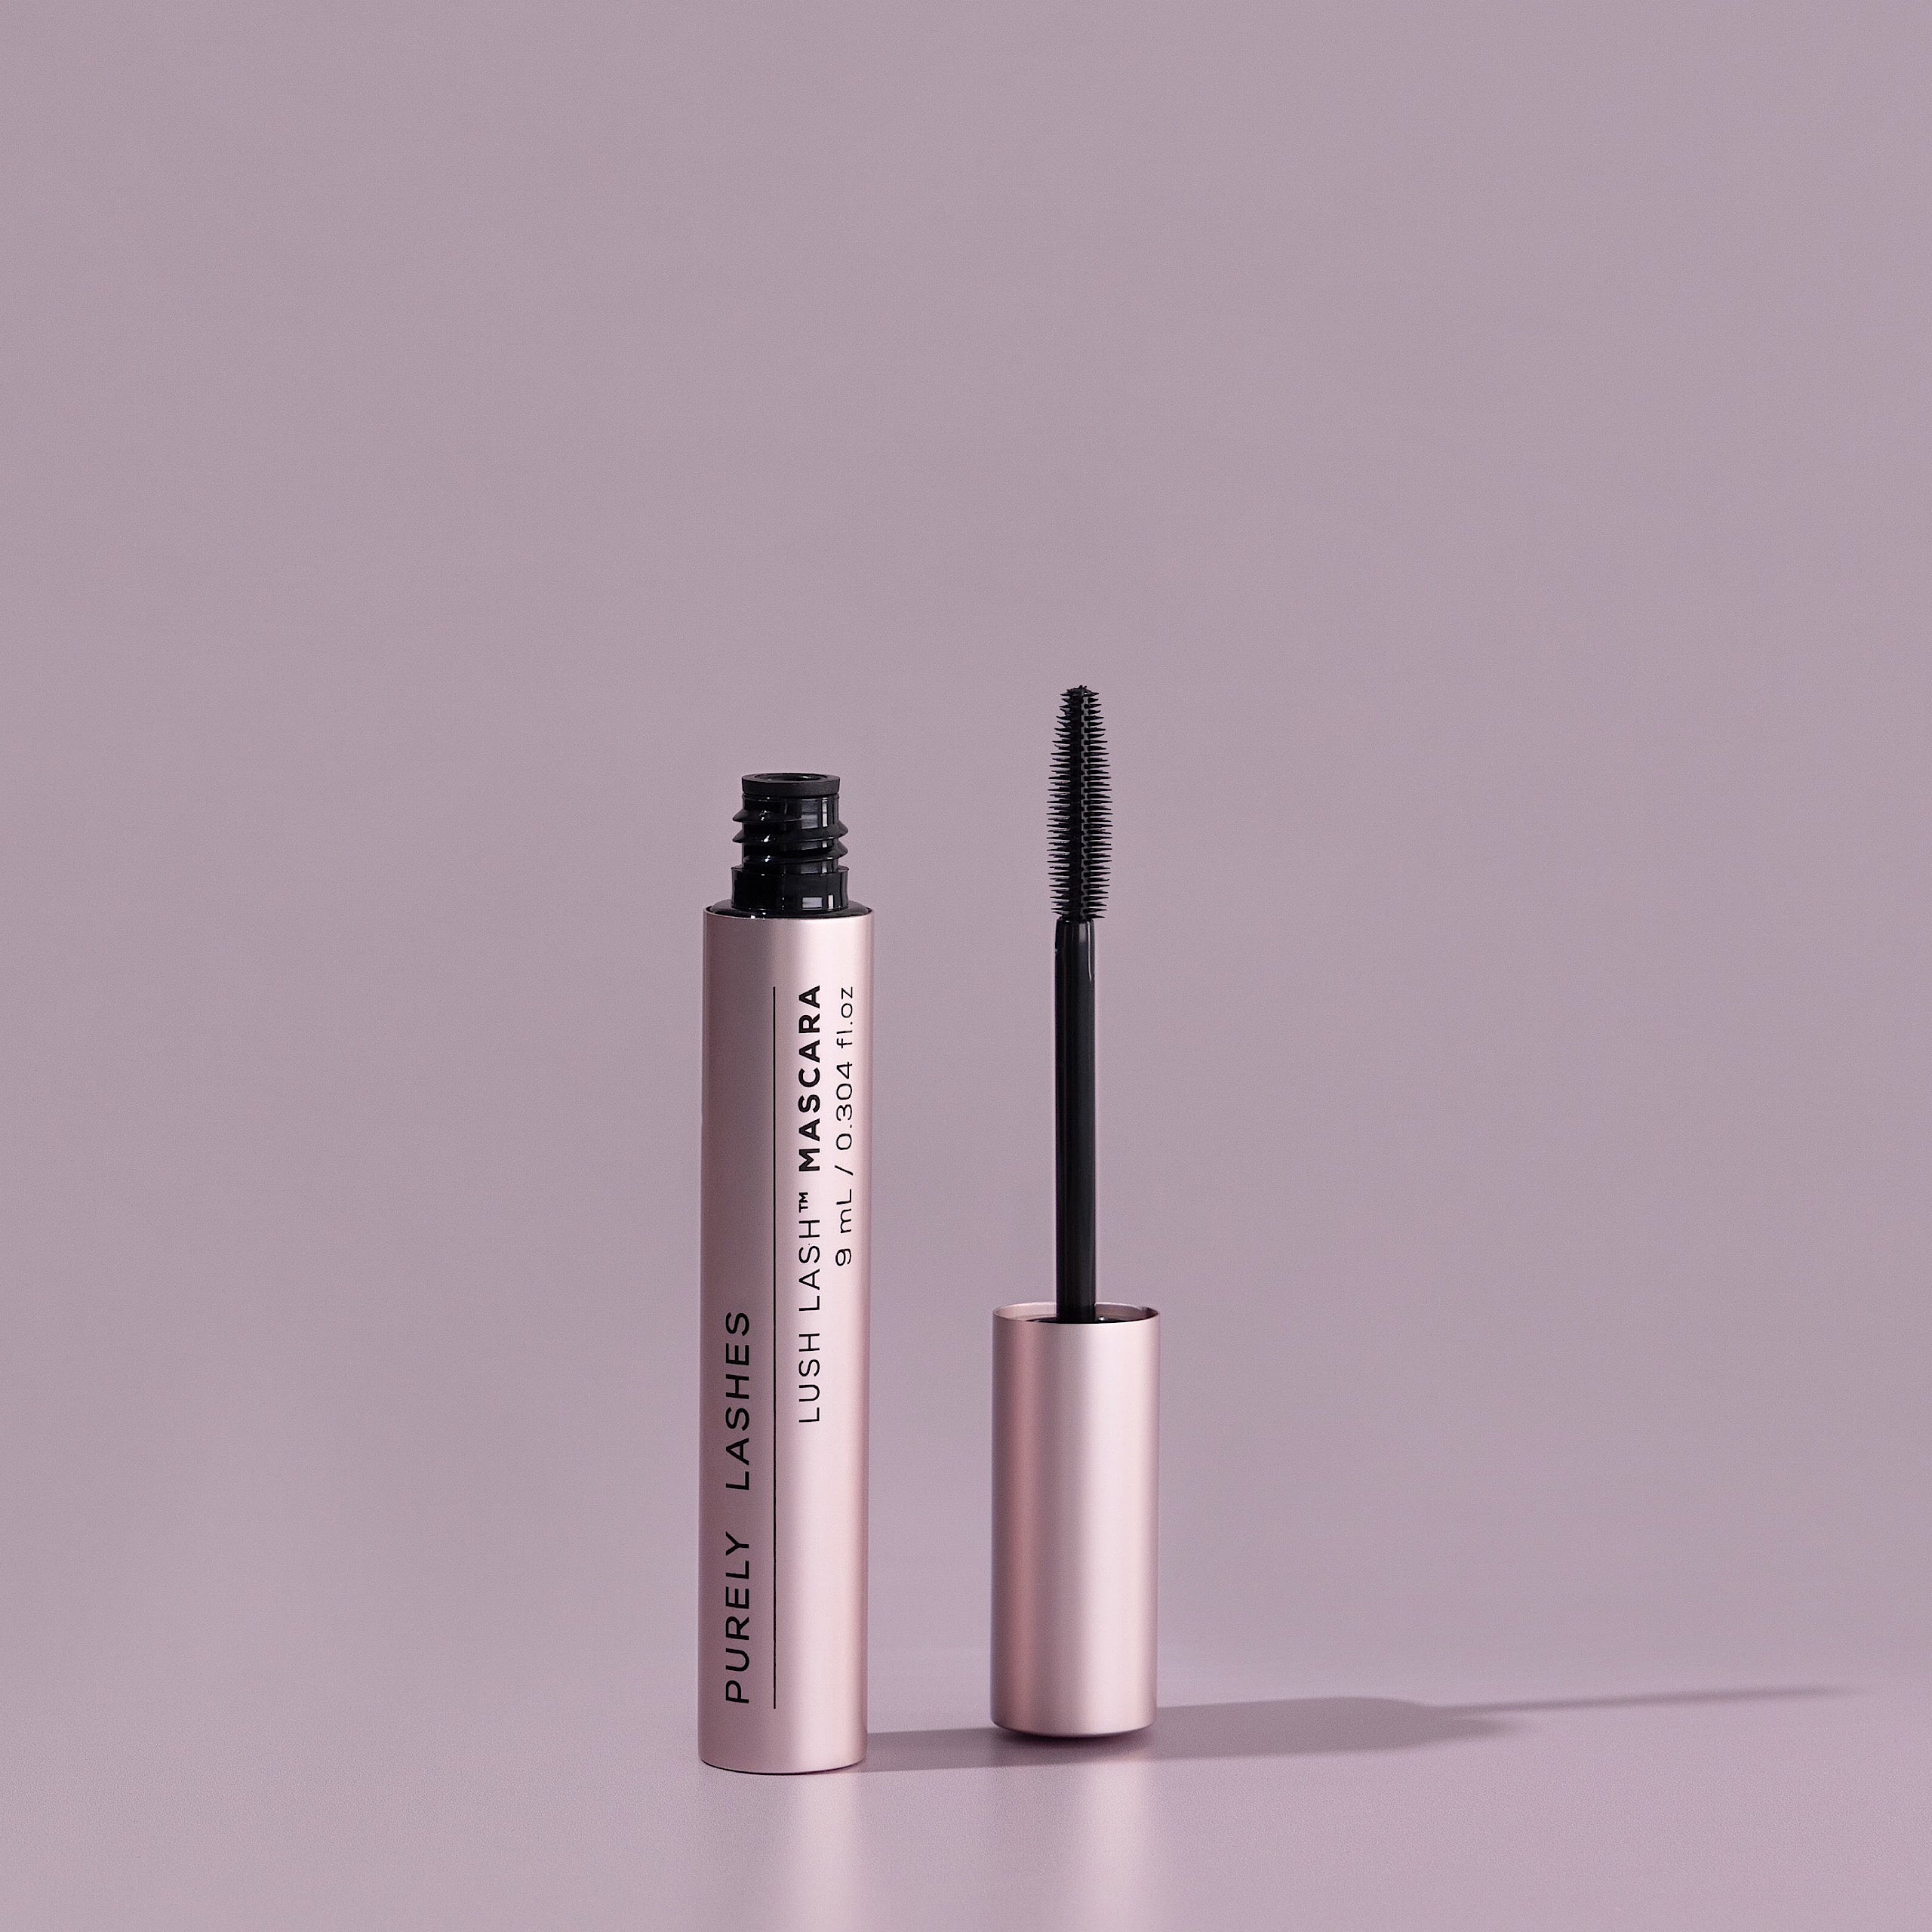 Purchase Six Lash Growth Serums & Receive Two FREE Newly Formulated Lush Lash Mascaras.